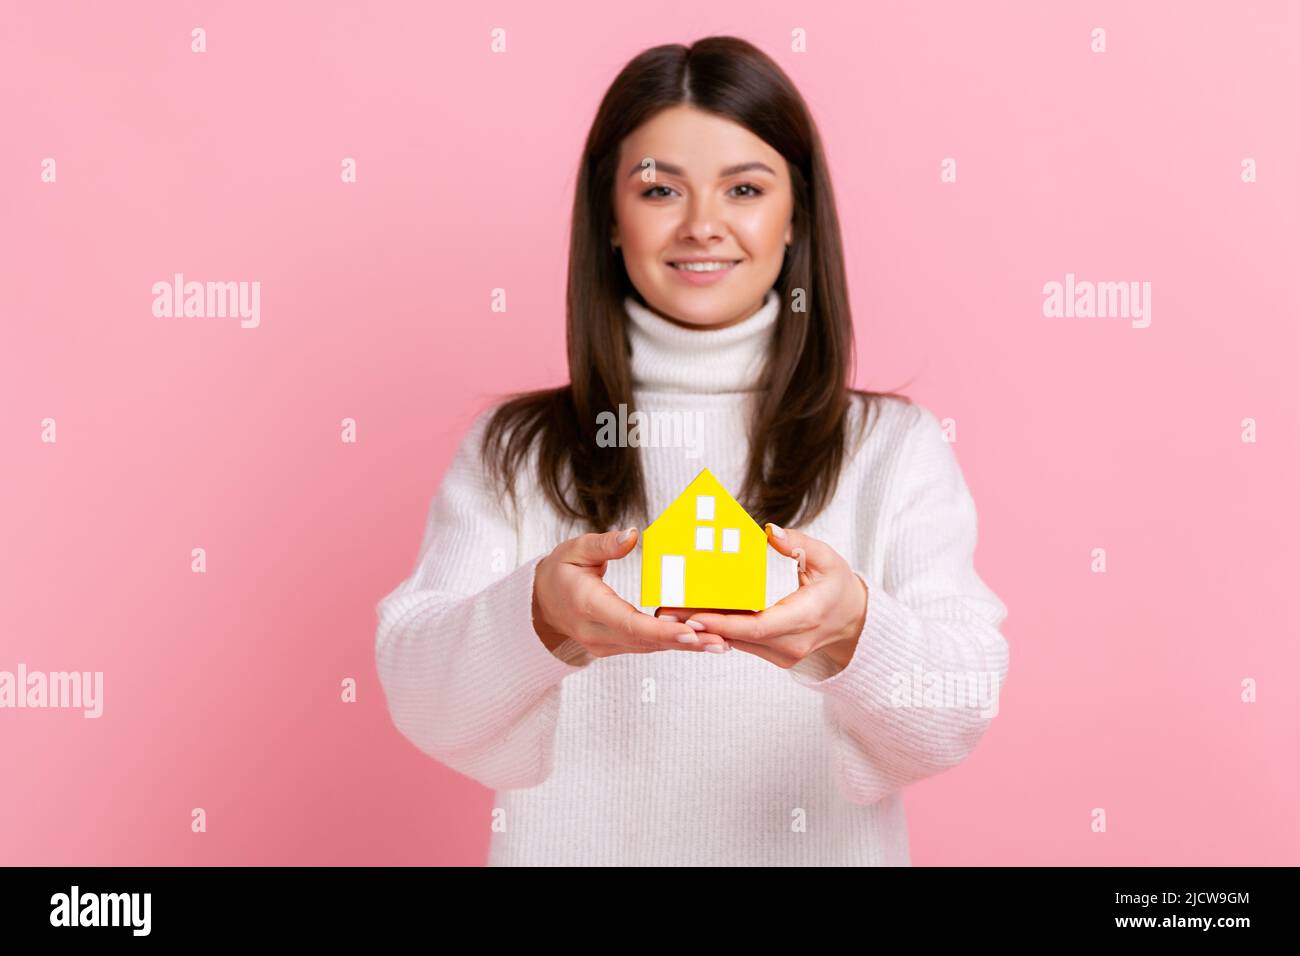 Beautiful woman with dark hair holding out paper small house, planning new home to buy, real estate, wearing white casual style sweater. Indoor studio shot isolated on pink background. Stock Photo